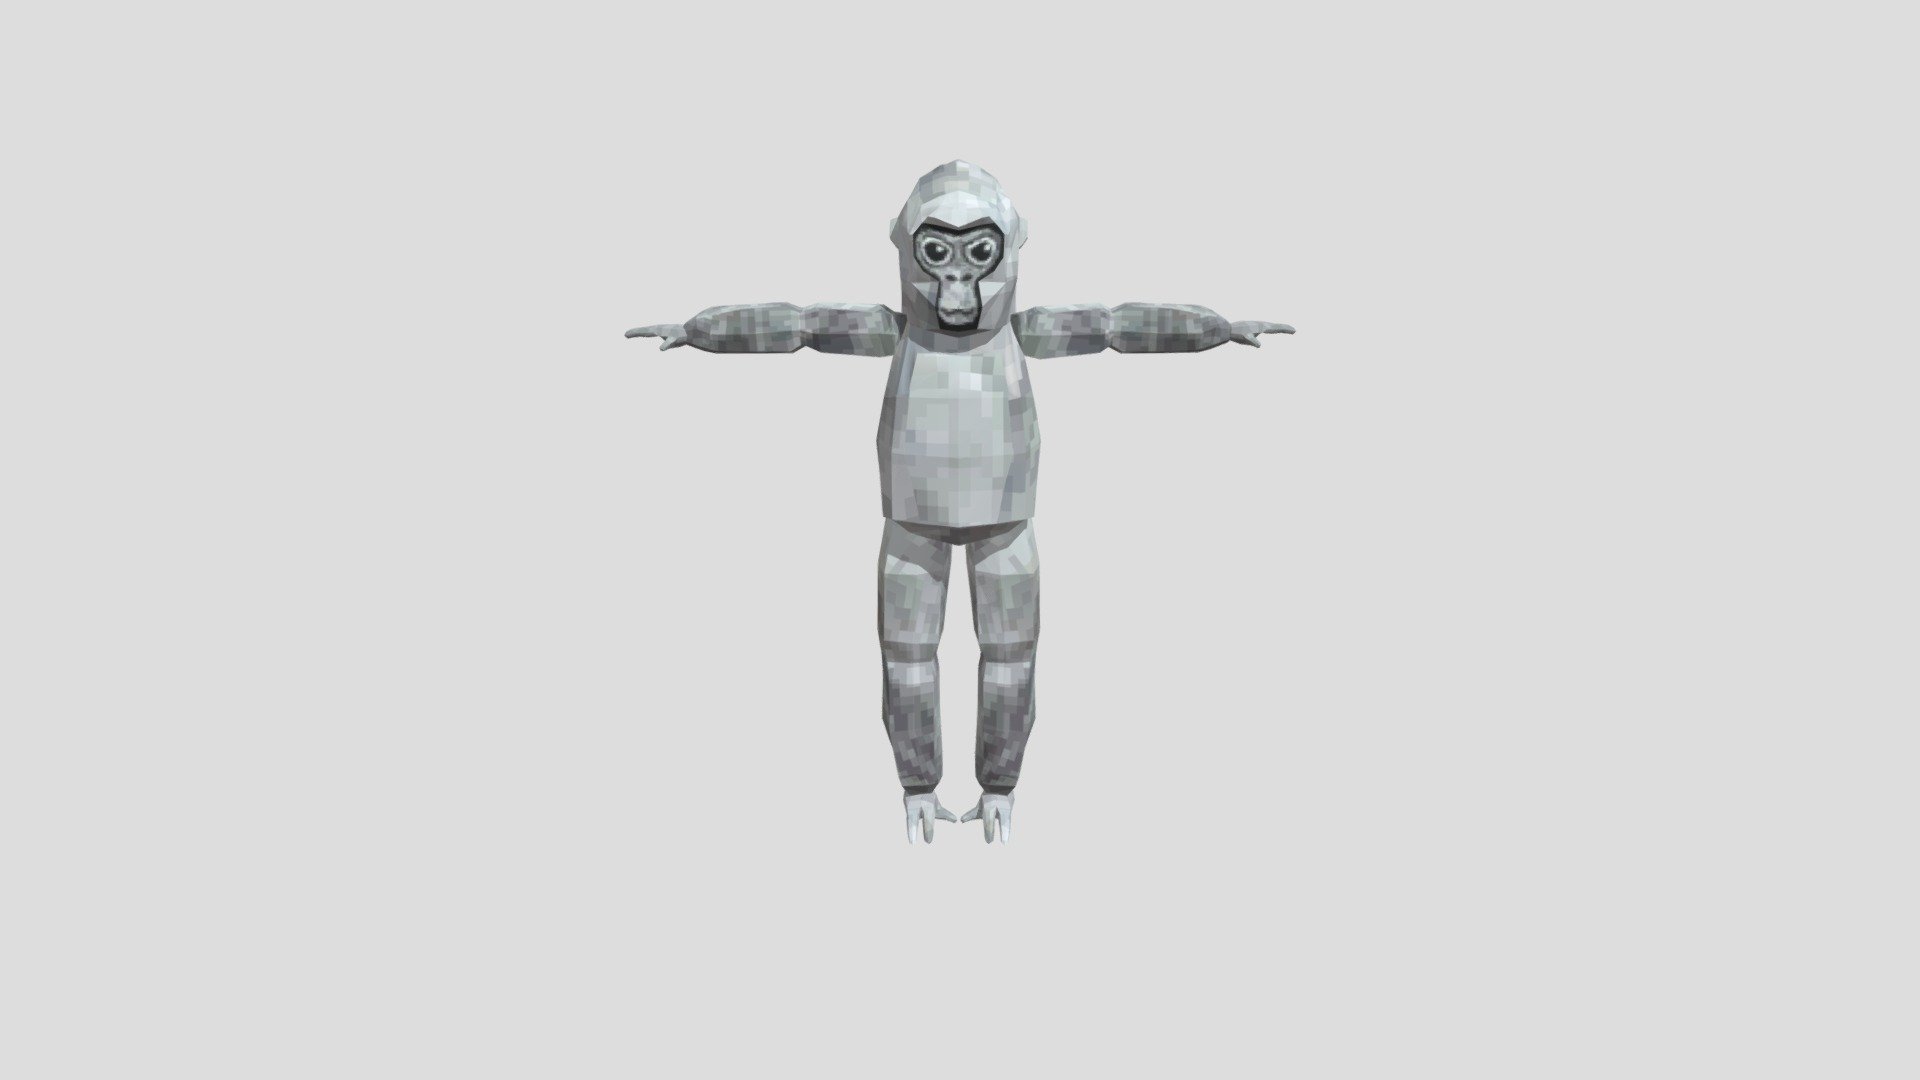 gorilla tag but it has more longer arms - Download Free 3D model